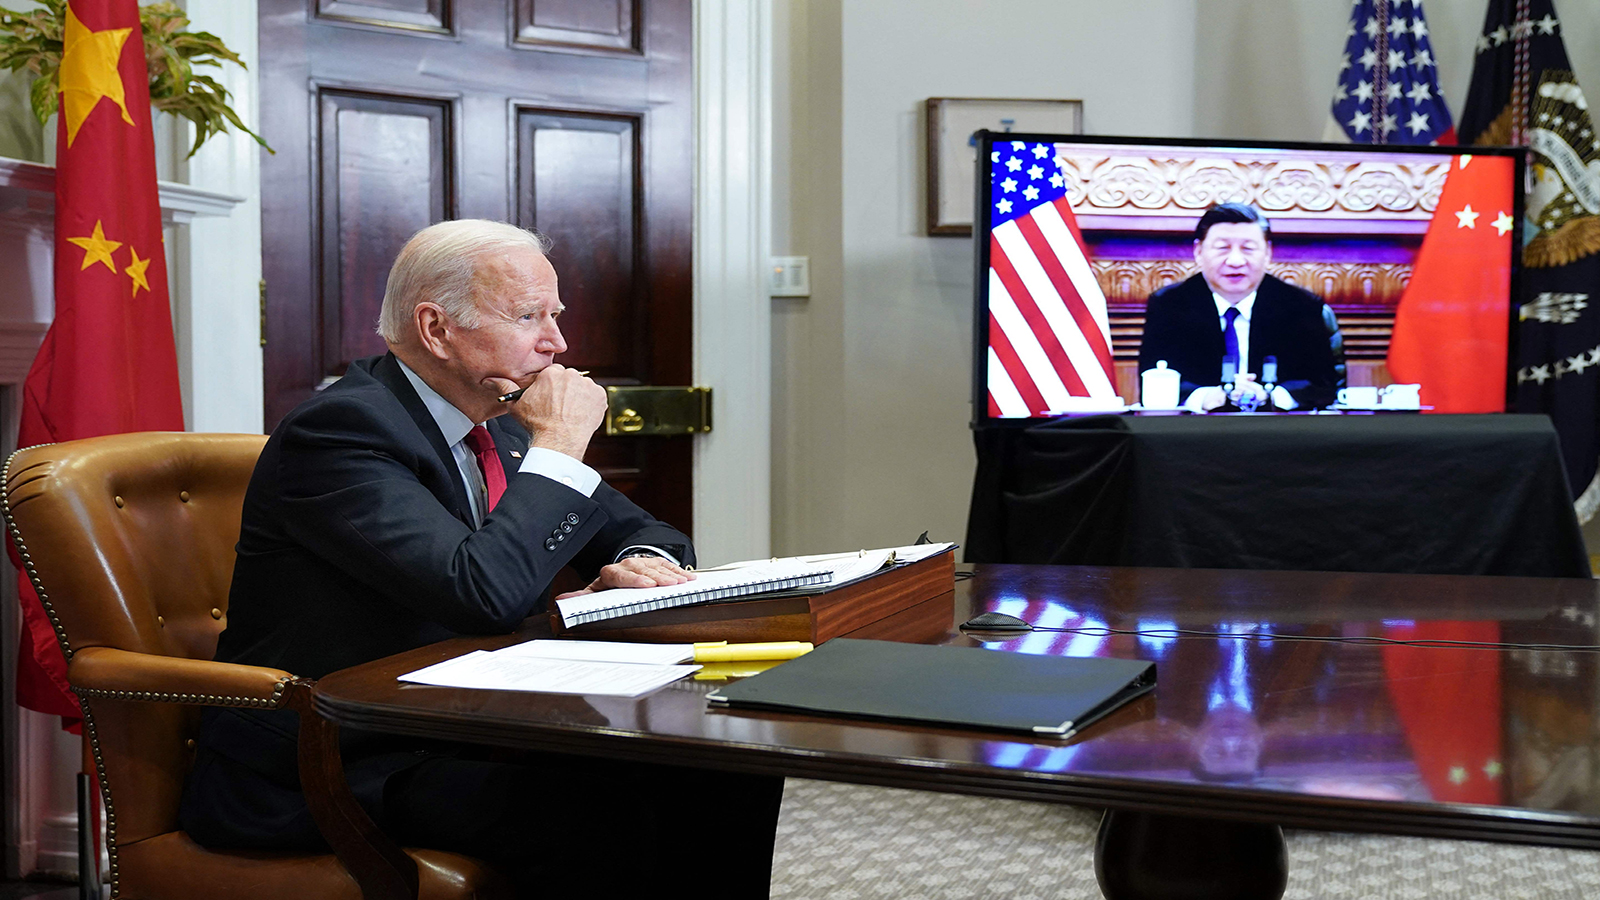 The start of the virtual summit between Biden and Xi